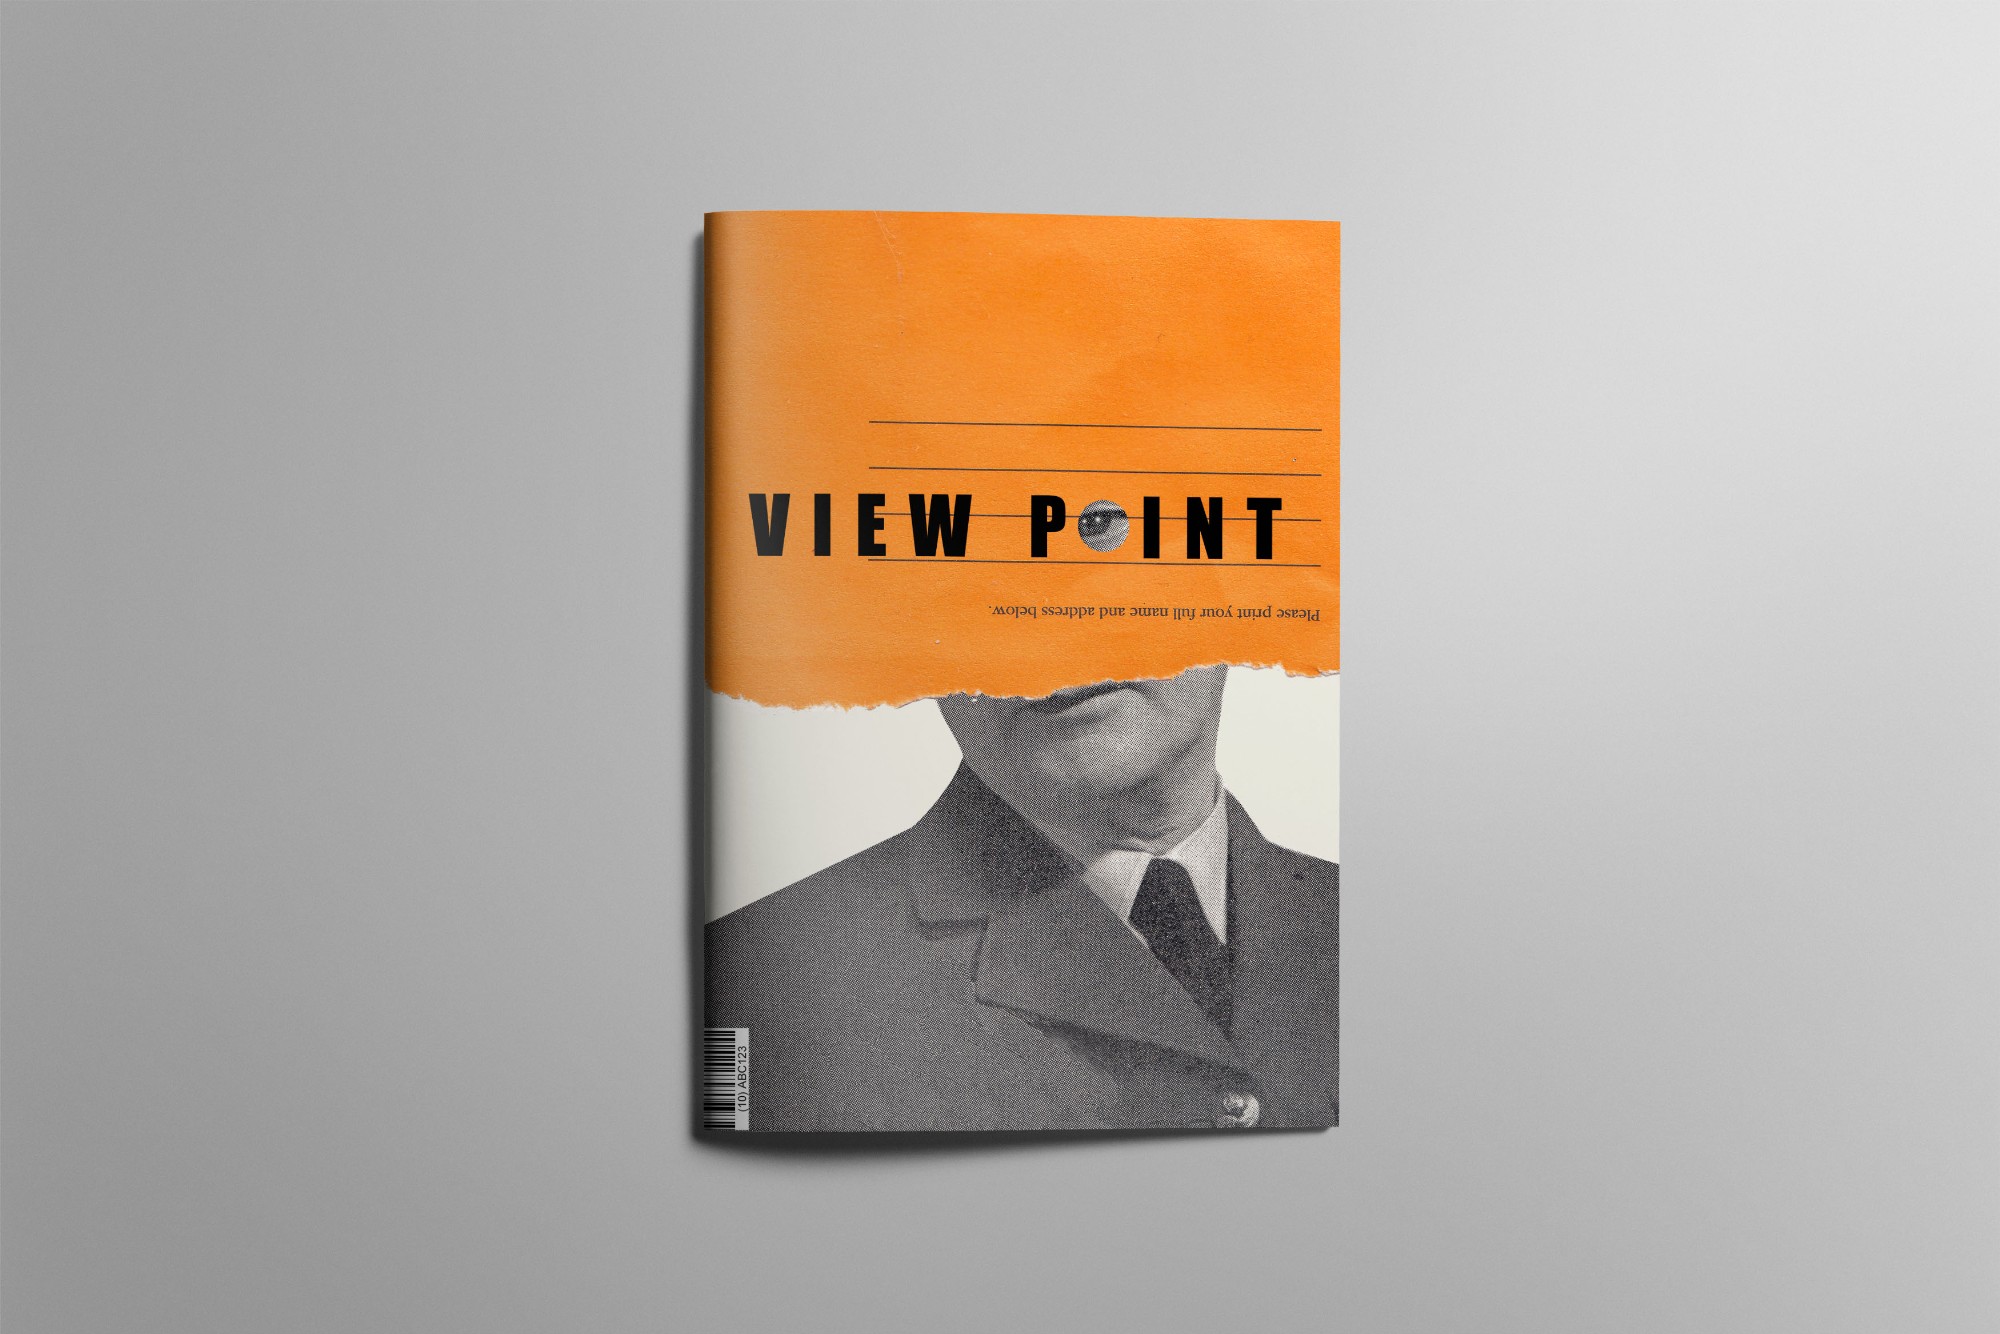 Viewpoint Magazine cover. View point educates and vocalises the legal rights to record and report injustice of the law.